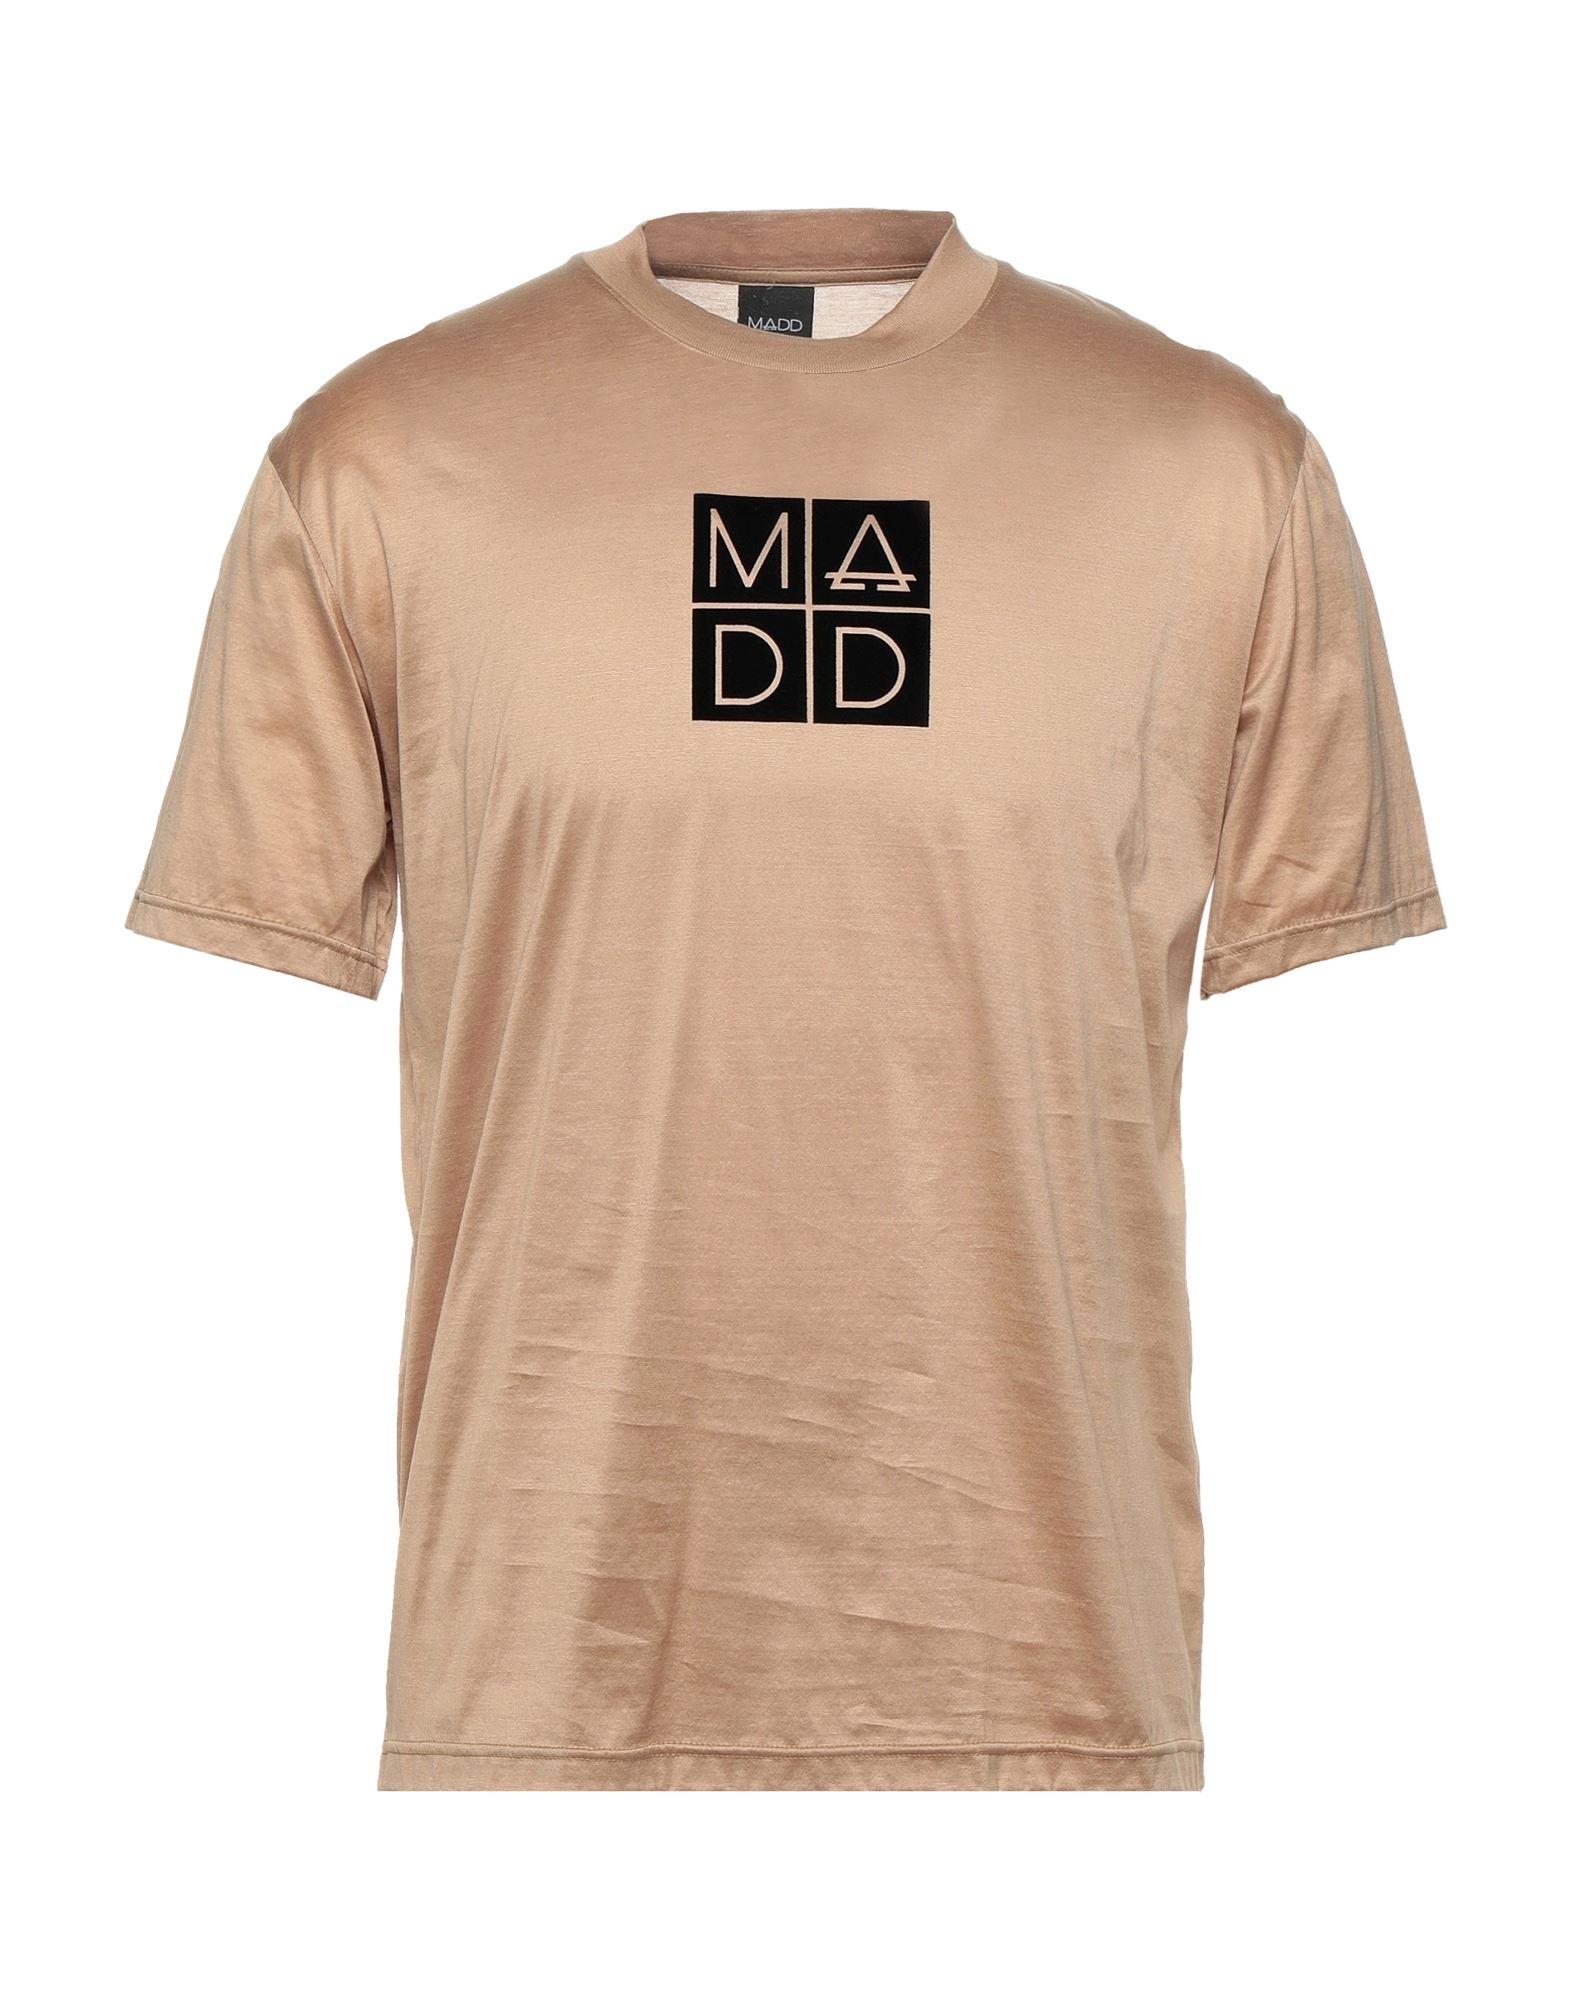 Madd T-shirts In Camel